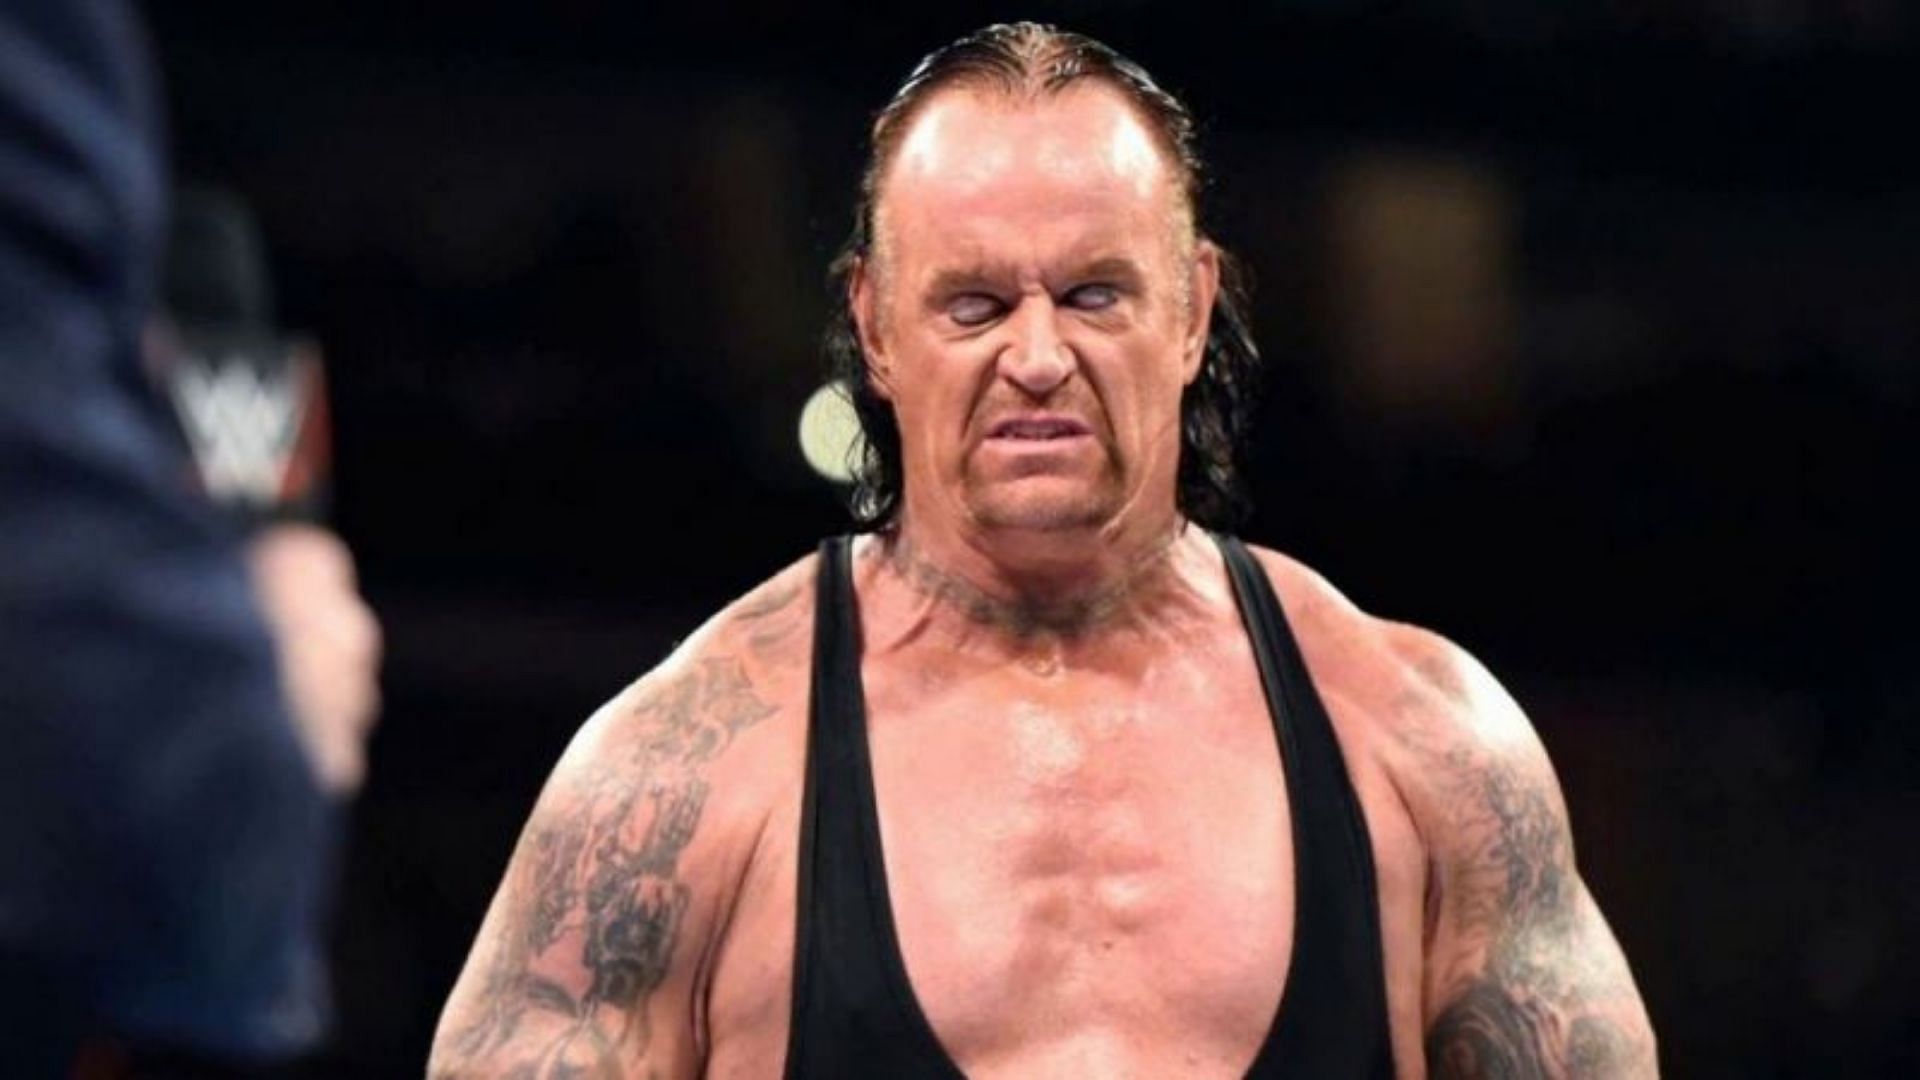 The Undertaker: A legend who instilled fear in fans for more than quarter of a century